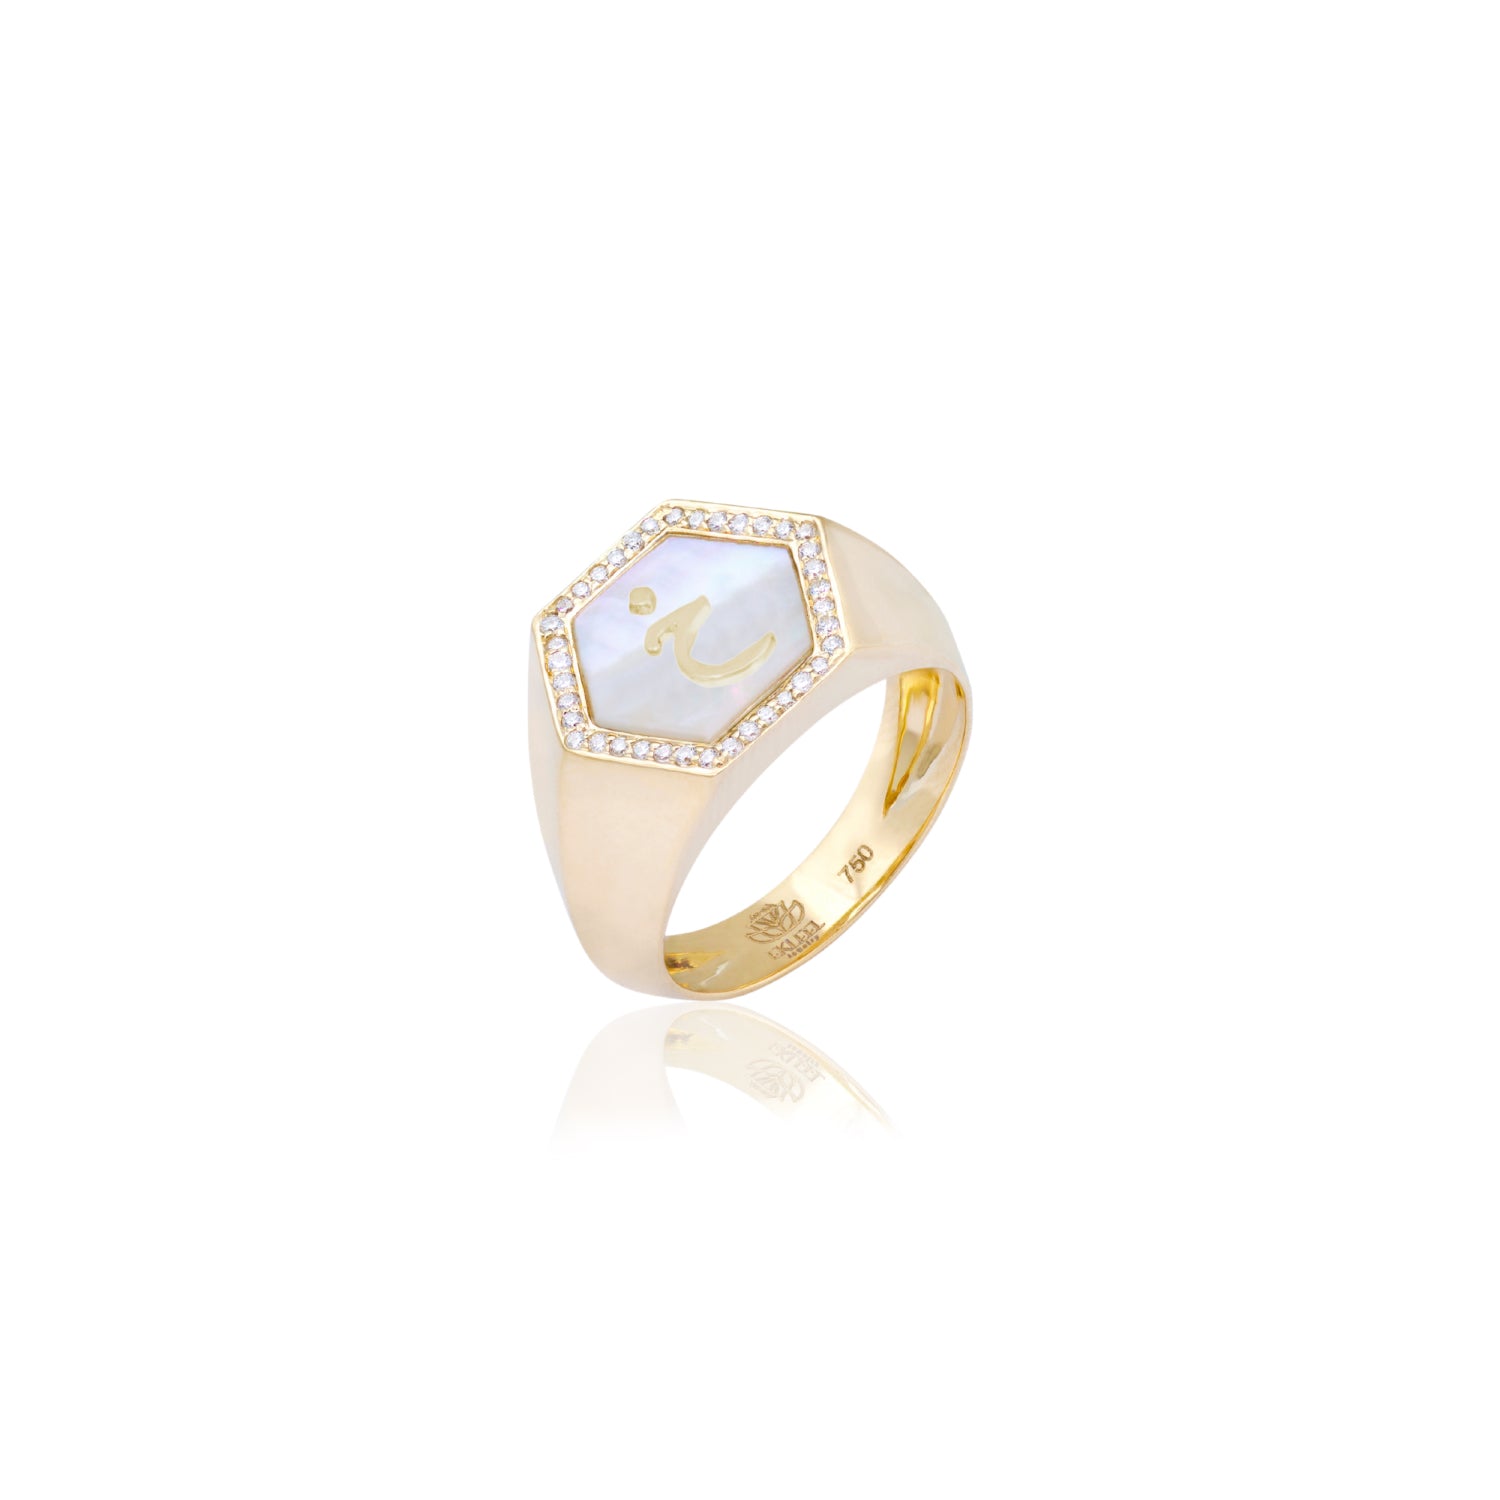 Qamoos 2.0 Letter خ White Mother of Pearl and Diamond Signet Ring in Yellow Gold